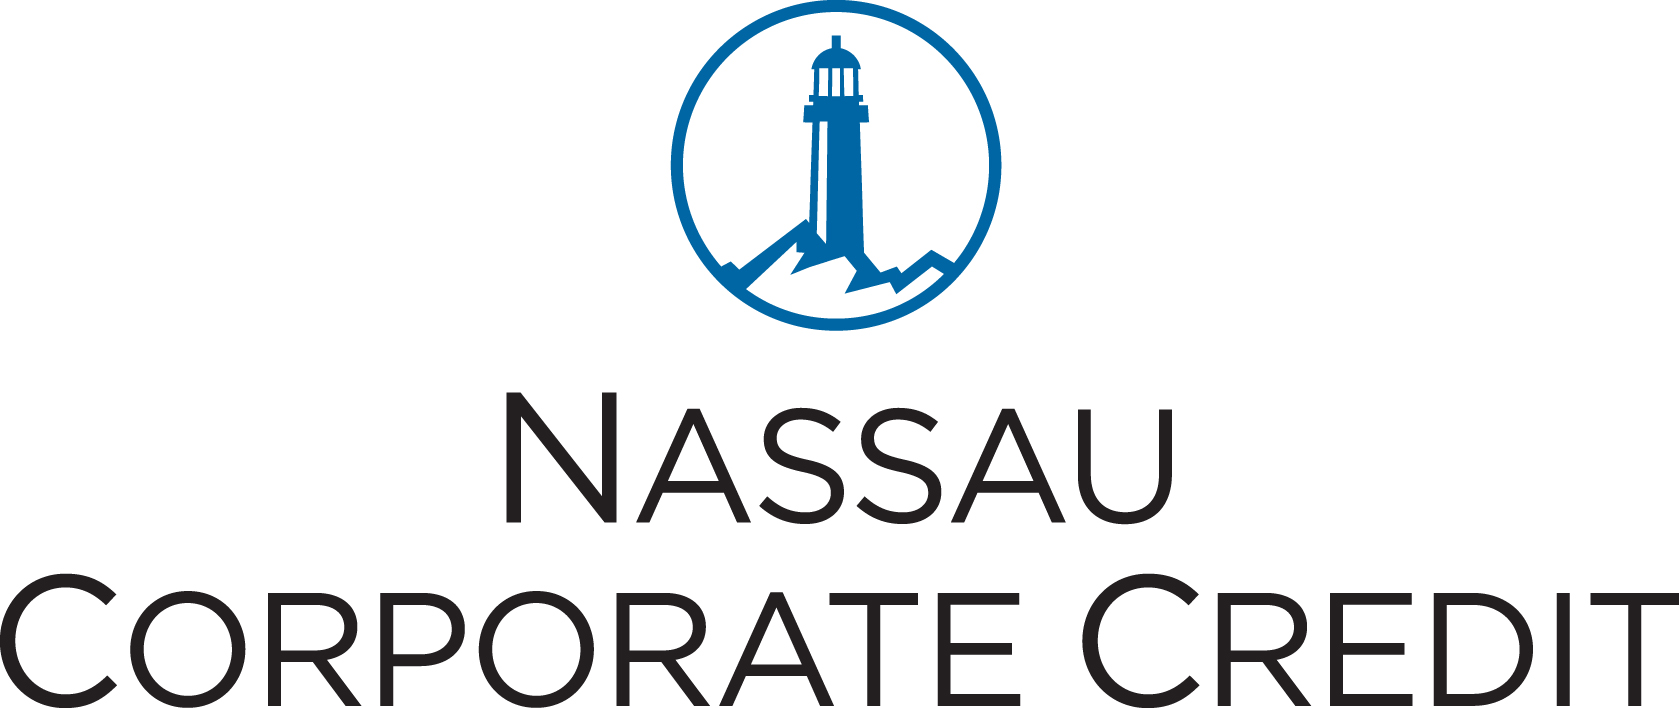 Nassau Corporate Credit Nominated for “Best US CLO Manager” and “Best New US CLO” for the 2020 Creditflux Manager Awards